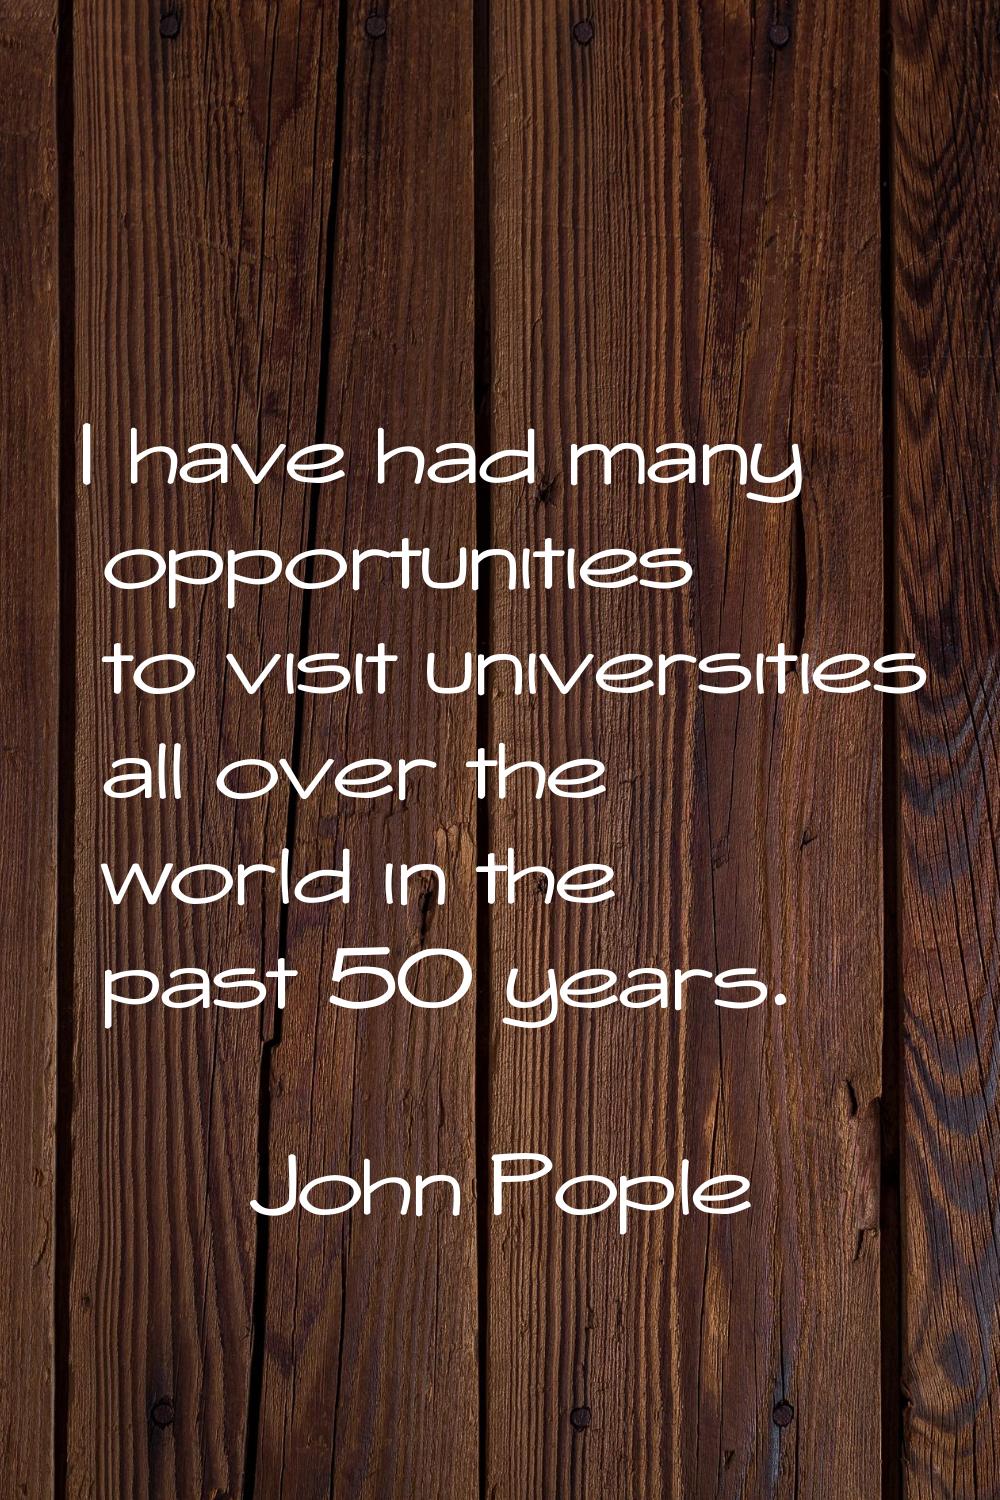 I have had many opportunities to visit universities all over the world in the past 50 years.